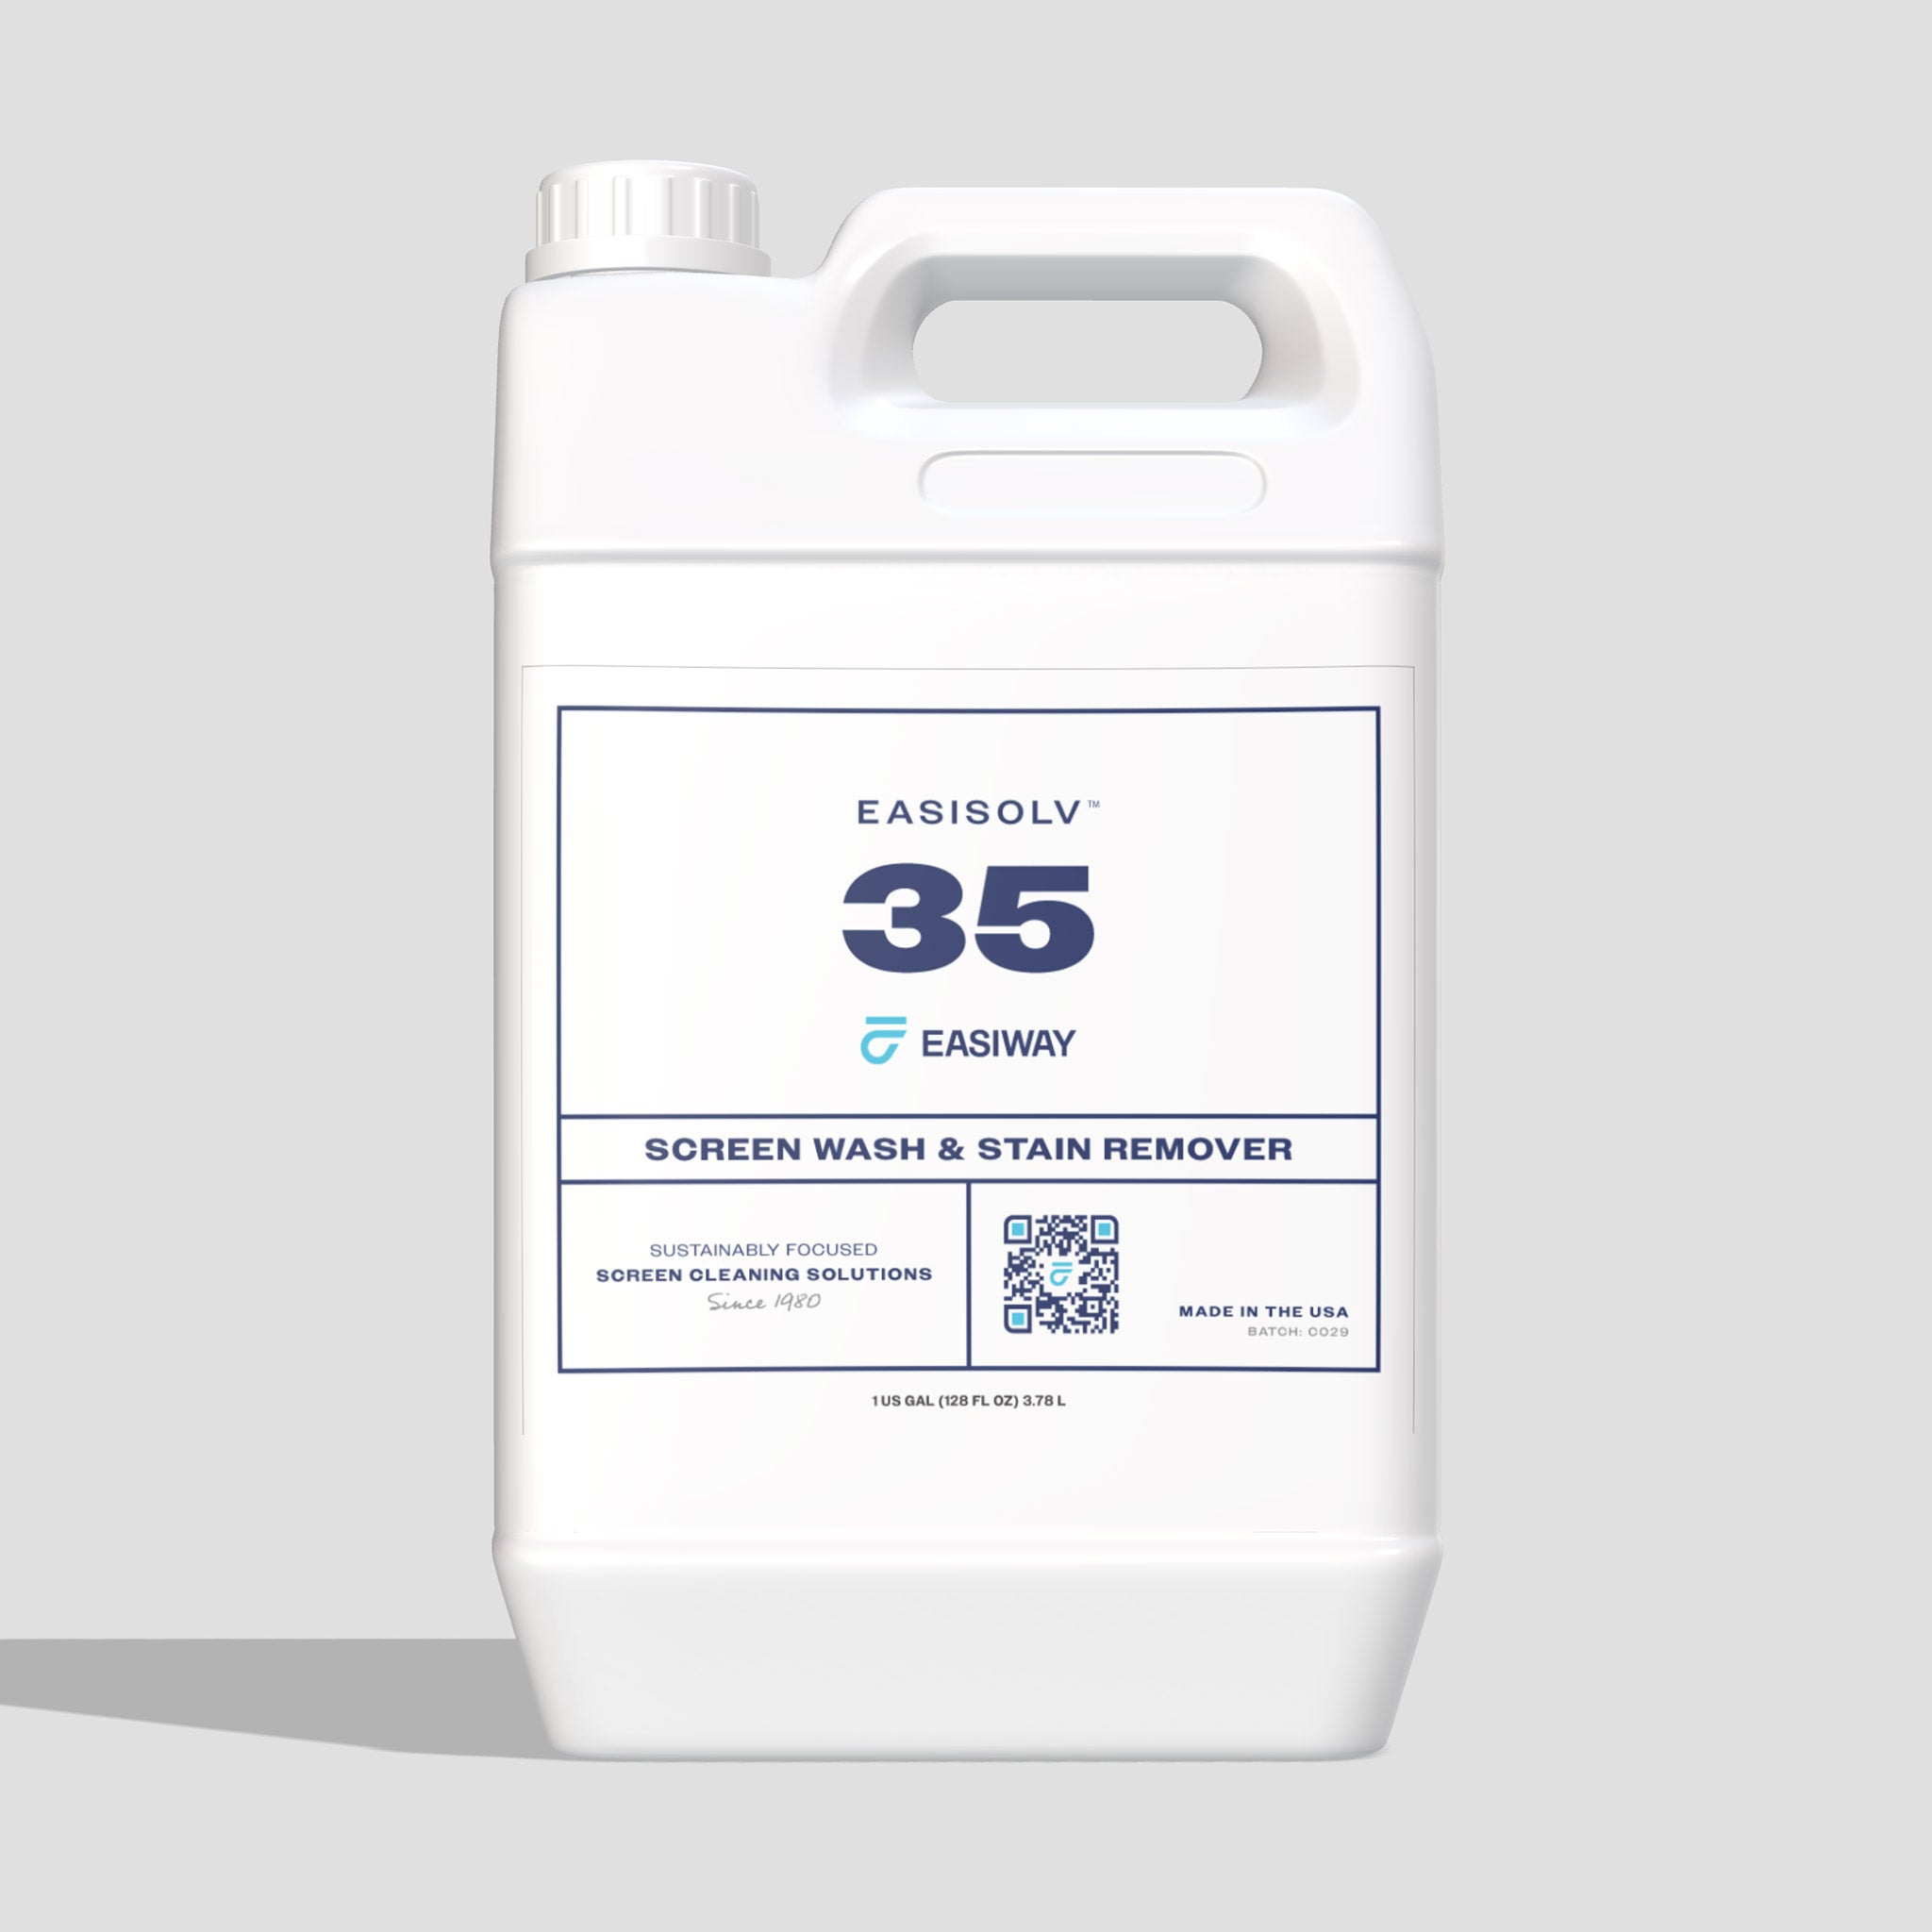 EasiSolv™ 35 Low Foam Screen Wash & Stain Remover